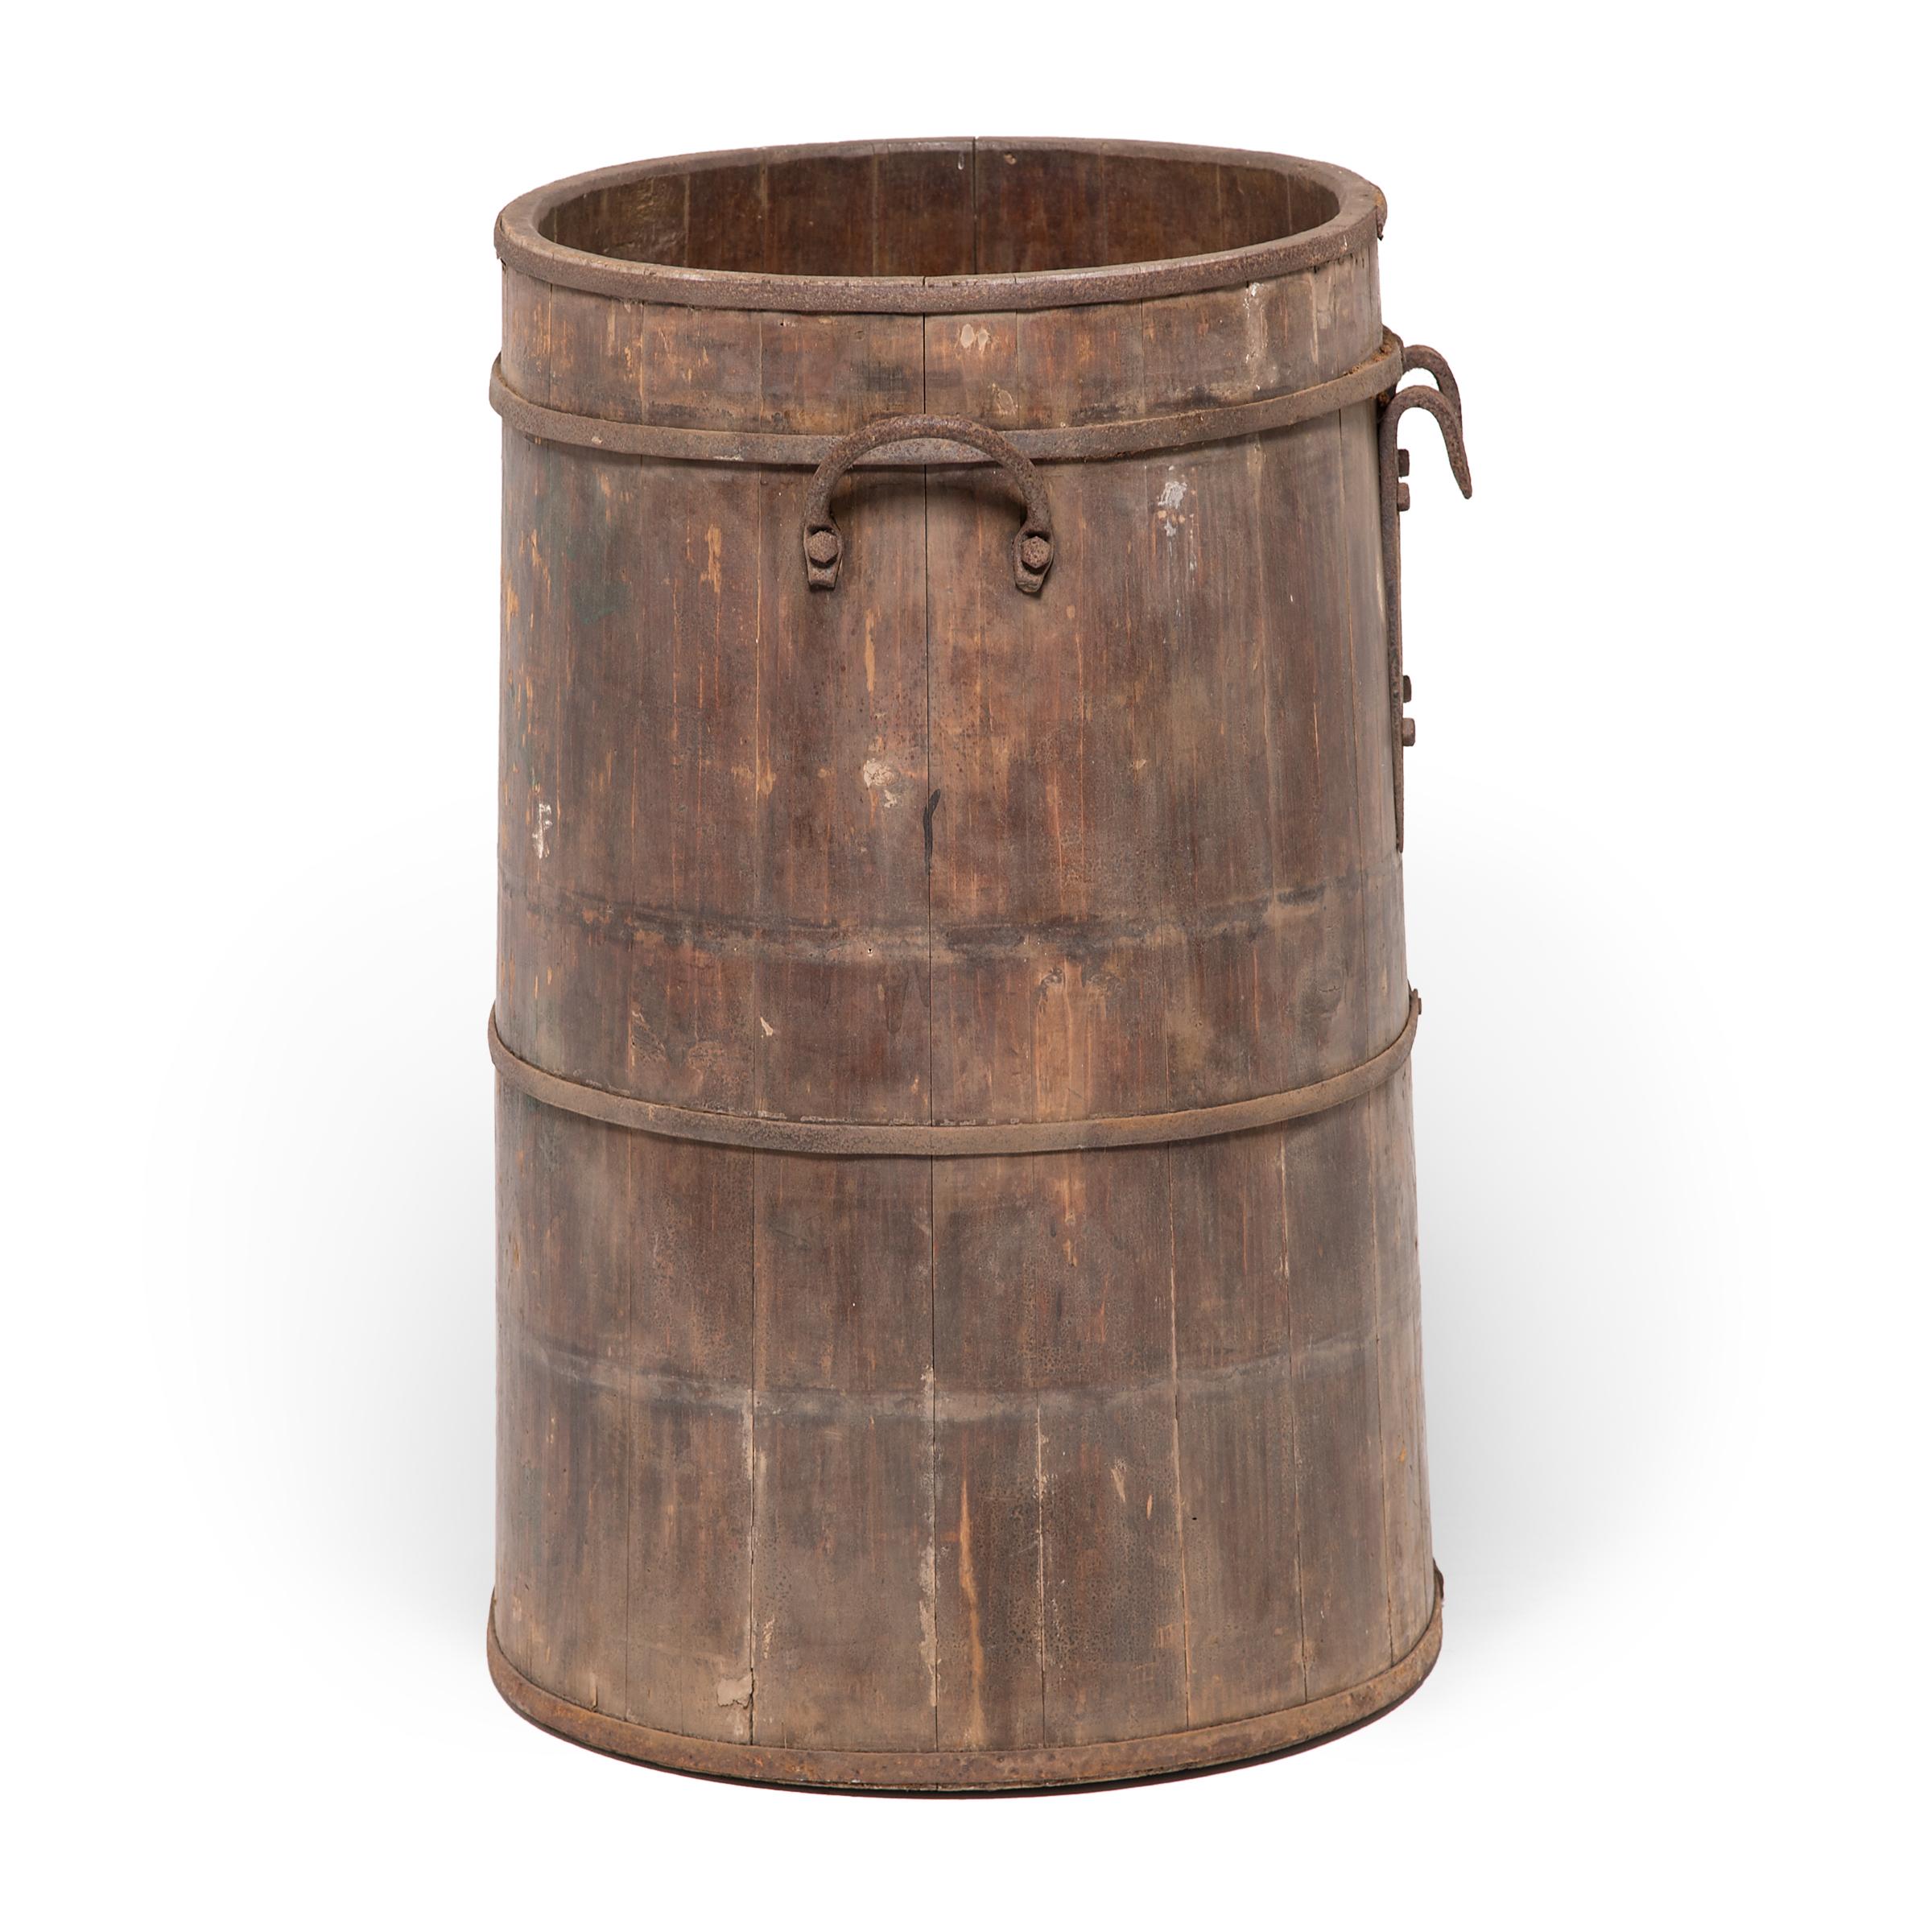 The beautifully aged surface of this Provincial water barrel is a testament to time and use. The barrel's finely joined wooden slats are held together by hand-smithed iron bands and cloaked in a layer of lacquer with a crackled finish. Chinese